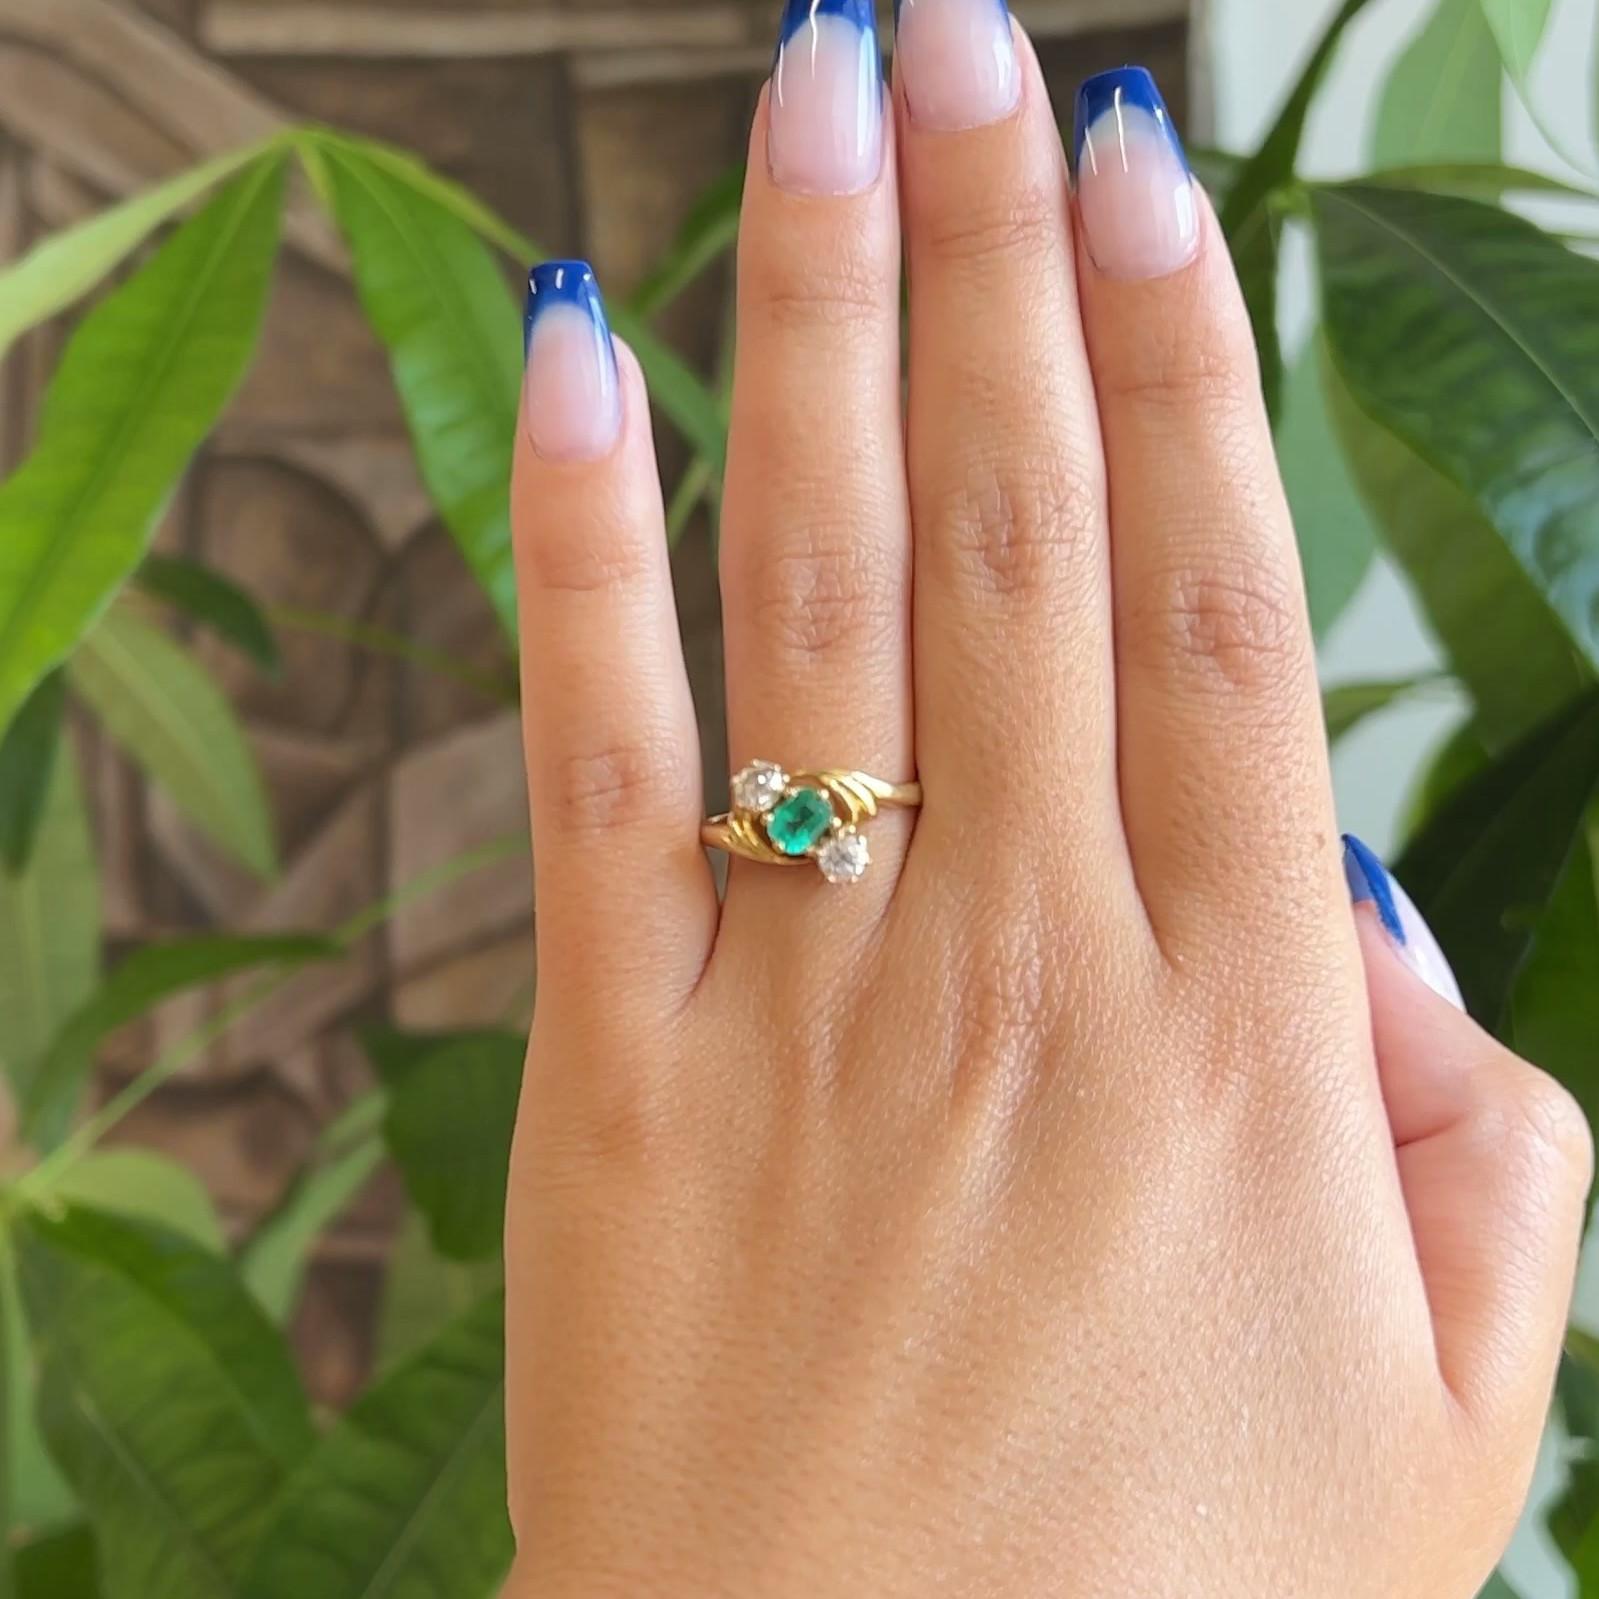 One Antique Emerald Old Mine Cut Diamonds 18 Karat Yellow Gold Three Stone Ring. Featuring one mixed cut emerald weighing approximately 0.45 carat. Accented by two old mine cut diamonds with a total weight of approximately 0.65 carat, graded I color